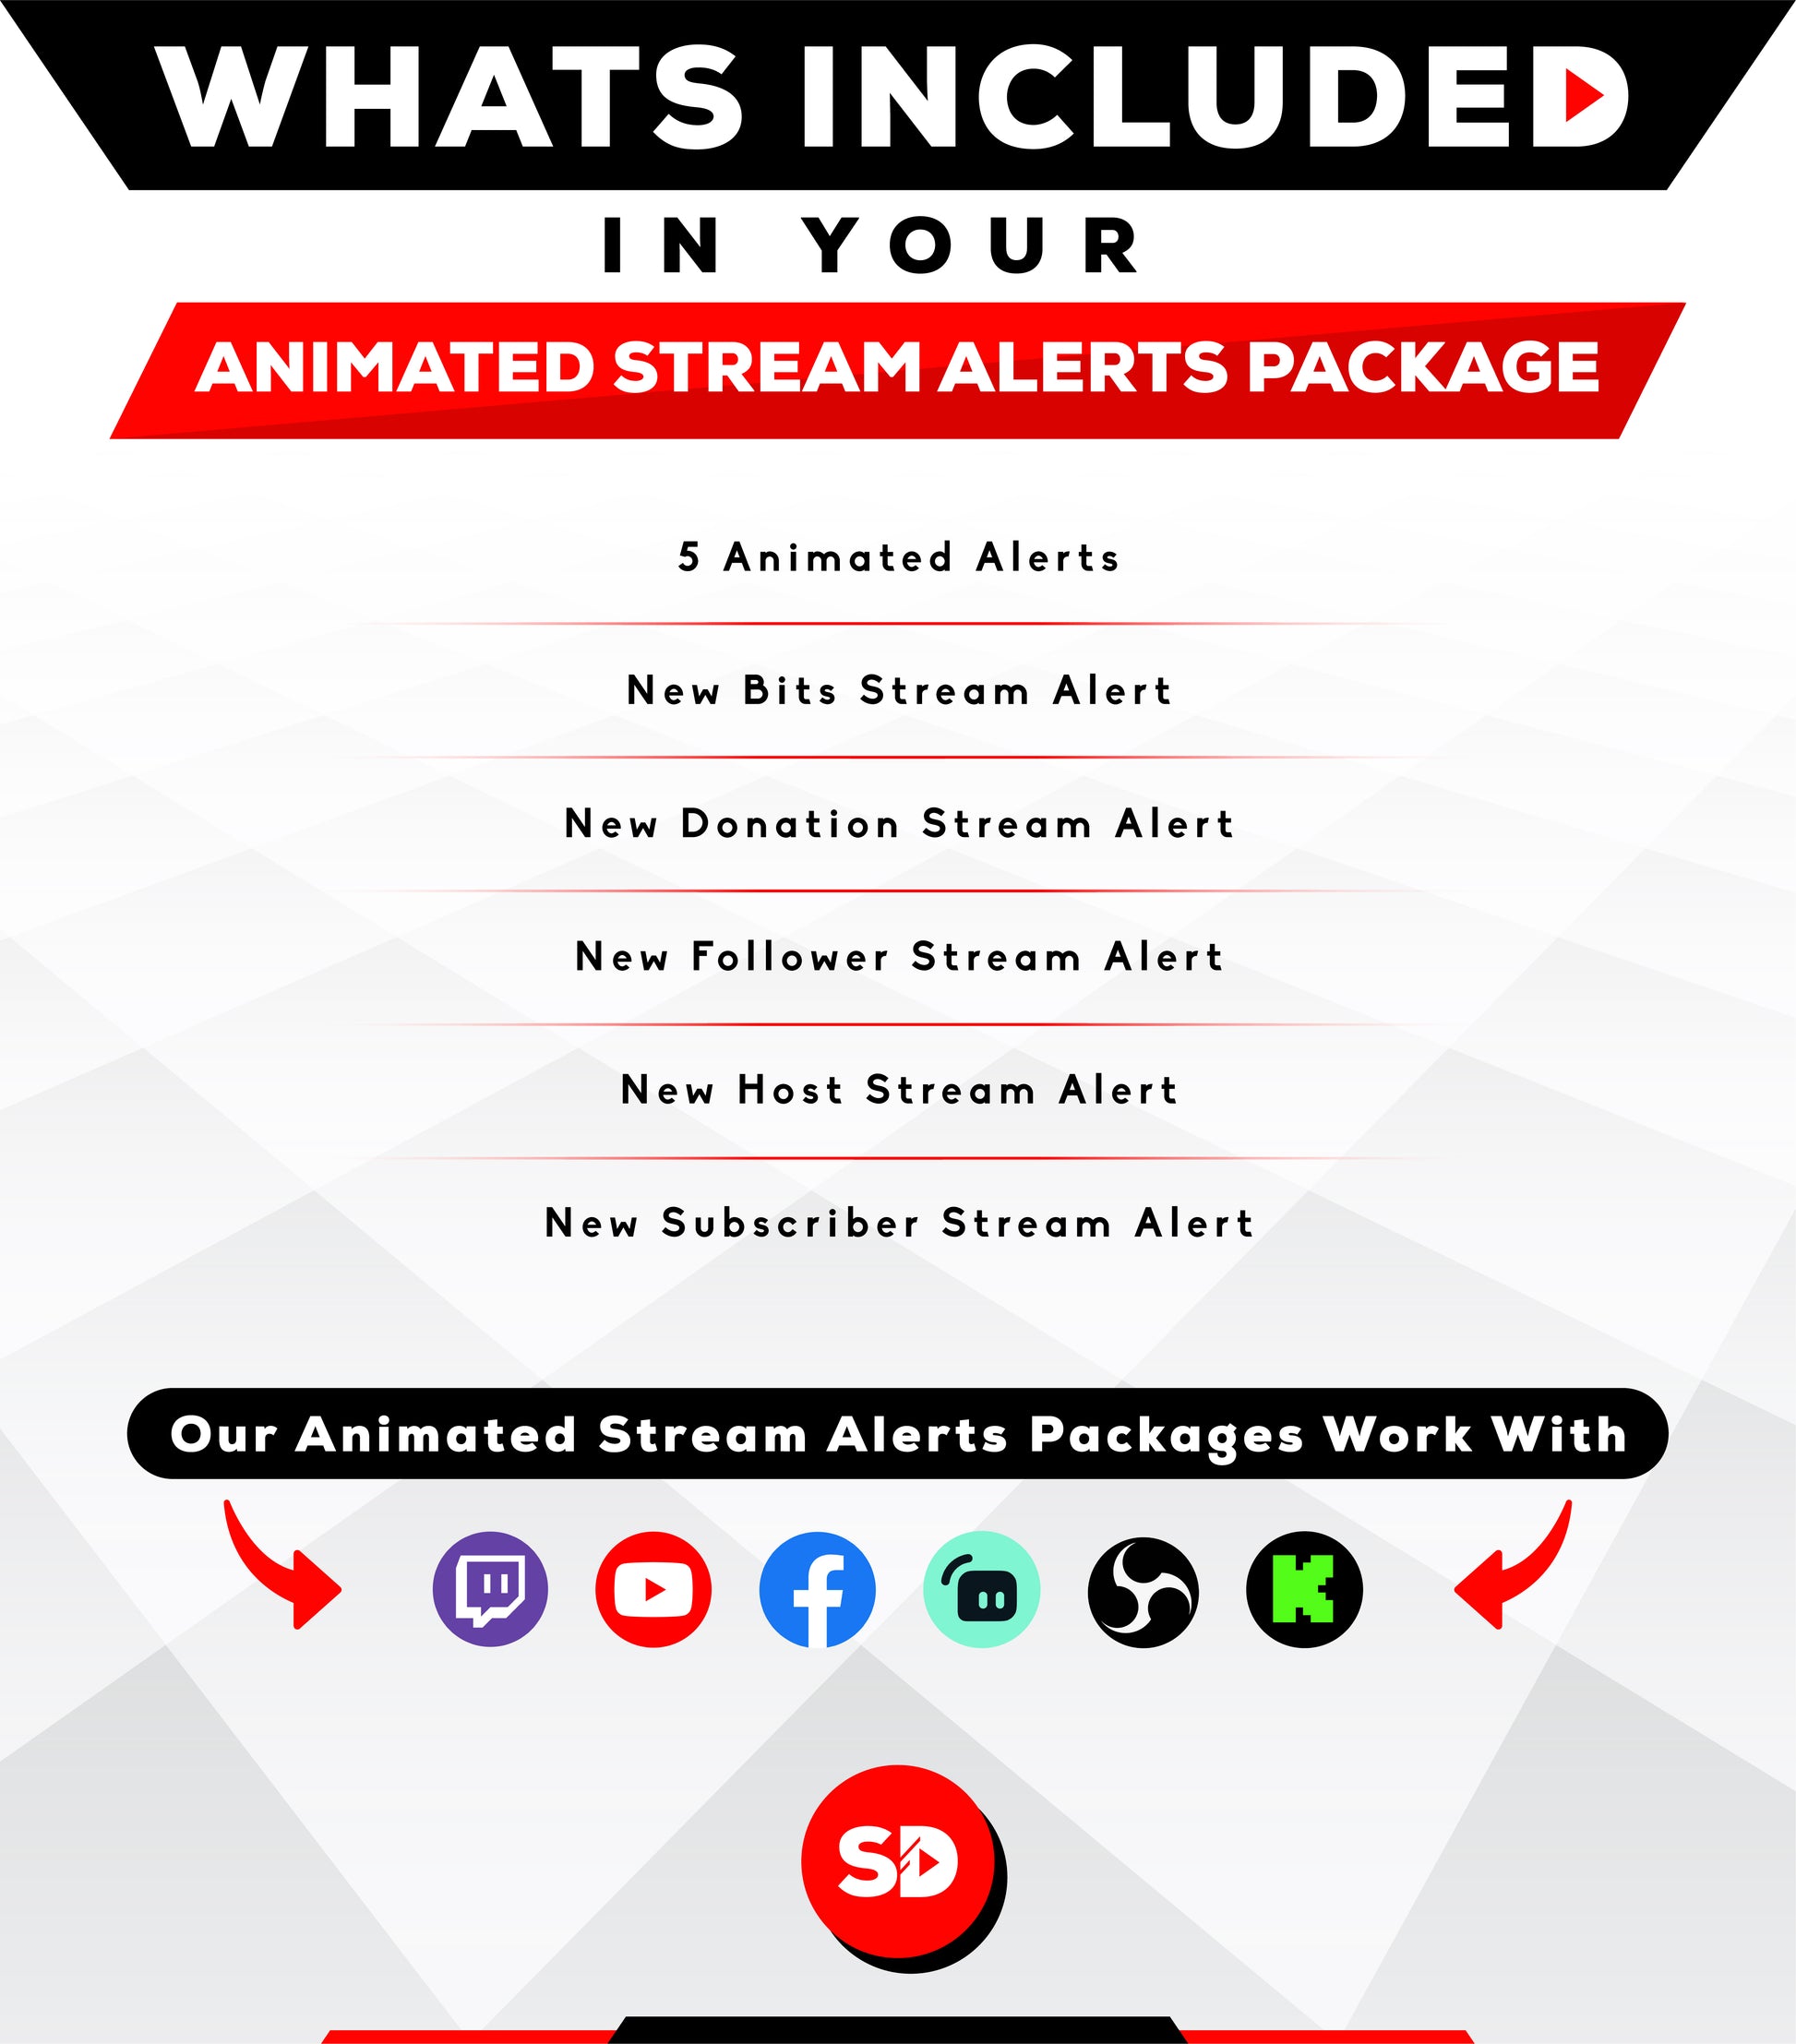 Whats included in your package - Alerts - Reload